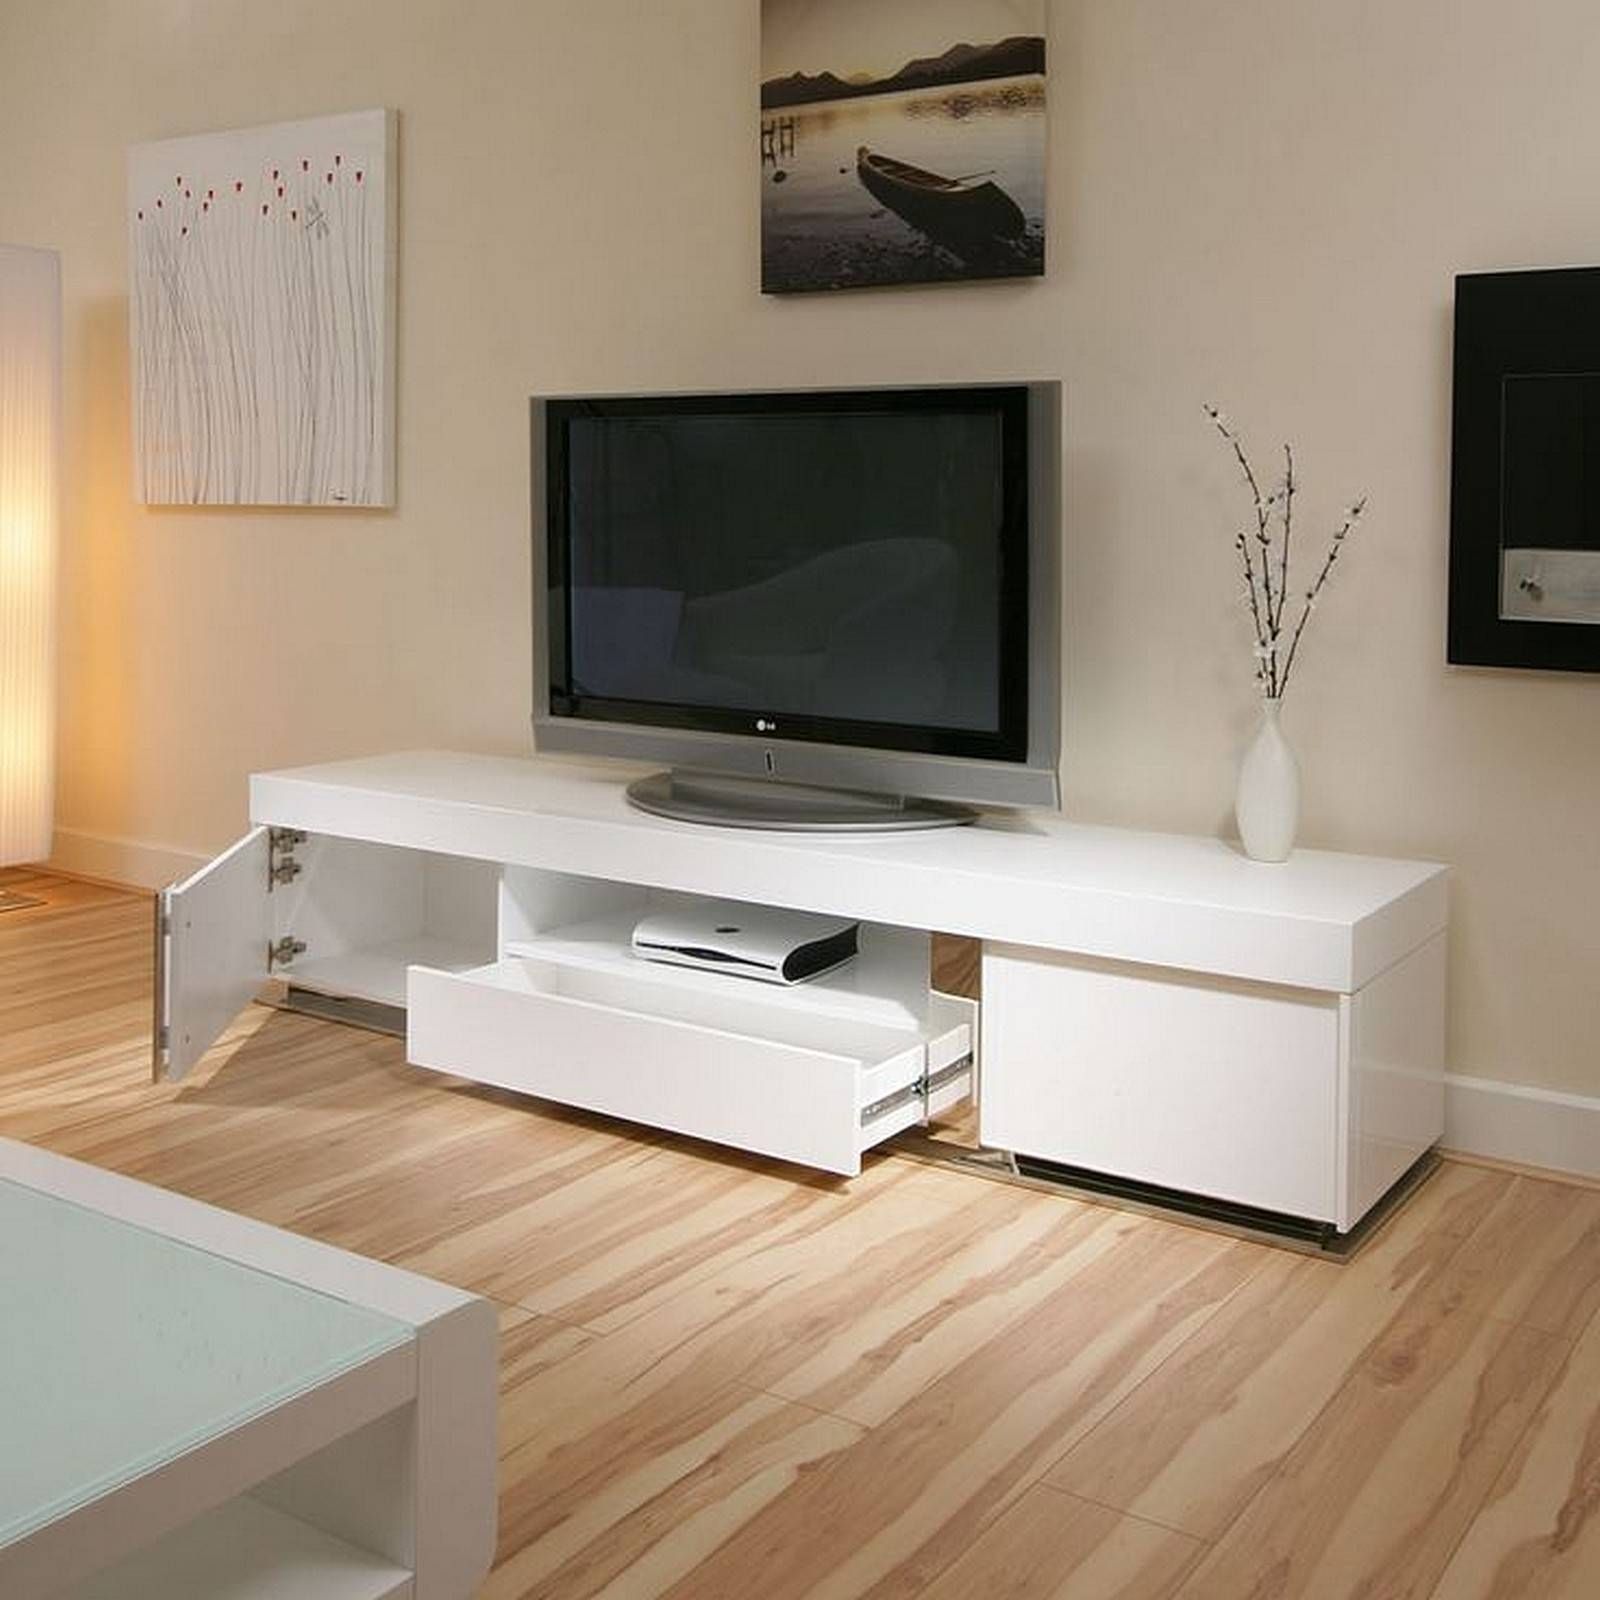 Furniture: Delightful Design Tv Stand Ideas Rectangle Shape White With Regard To Single Shelf Tv Stands (View 1 of 15)